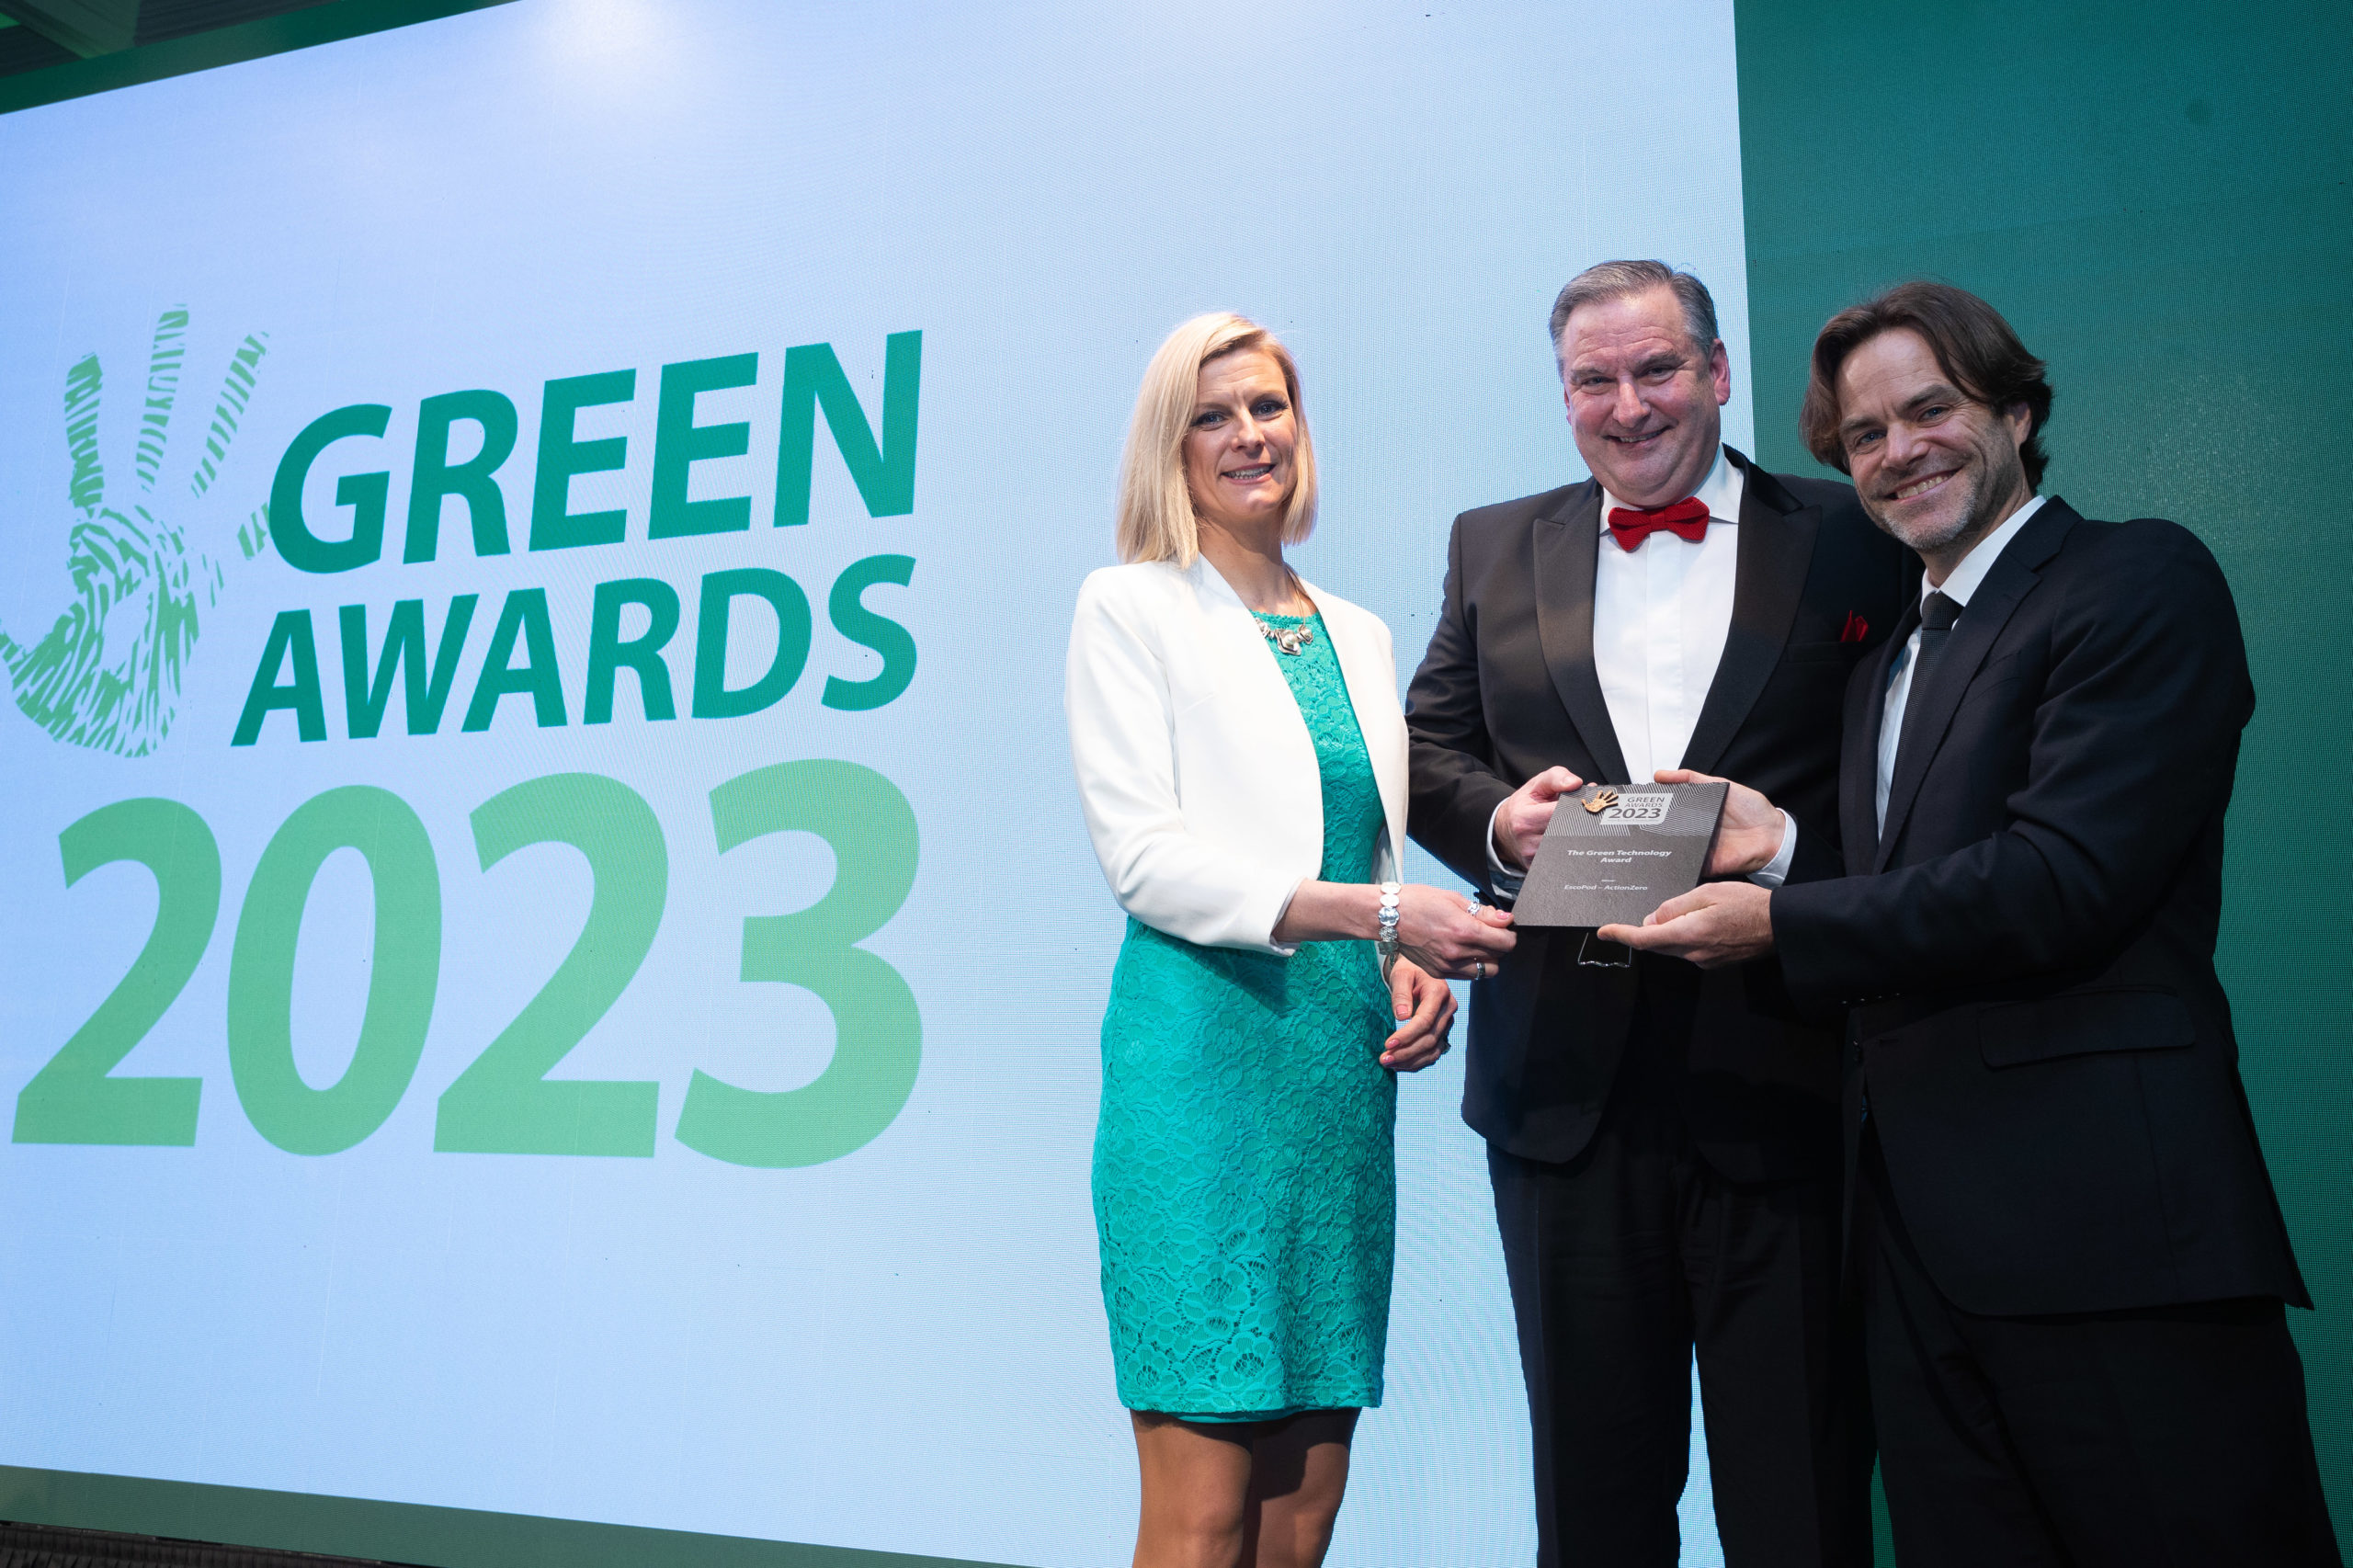 Pictured at the Green Awards 2022, in the The Clayton
Hotel, Burlington Road, Dublin 4 02/21/2023